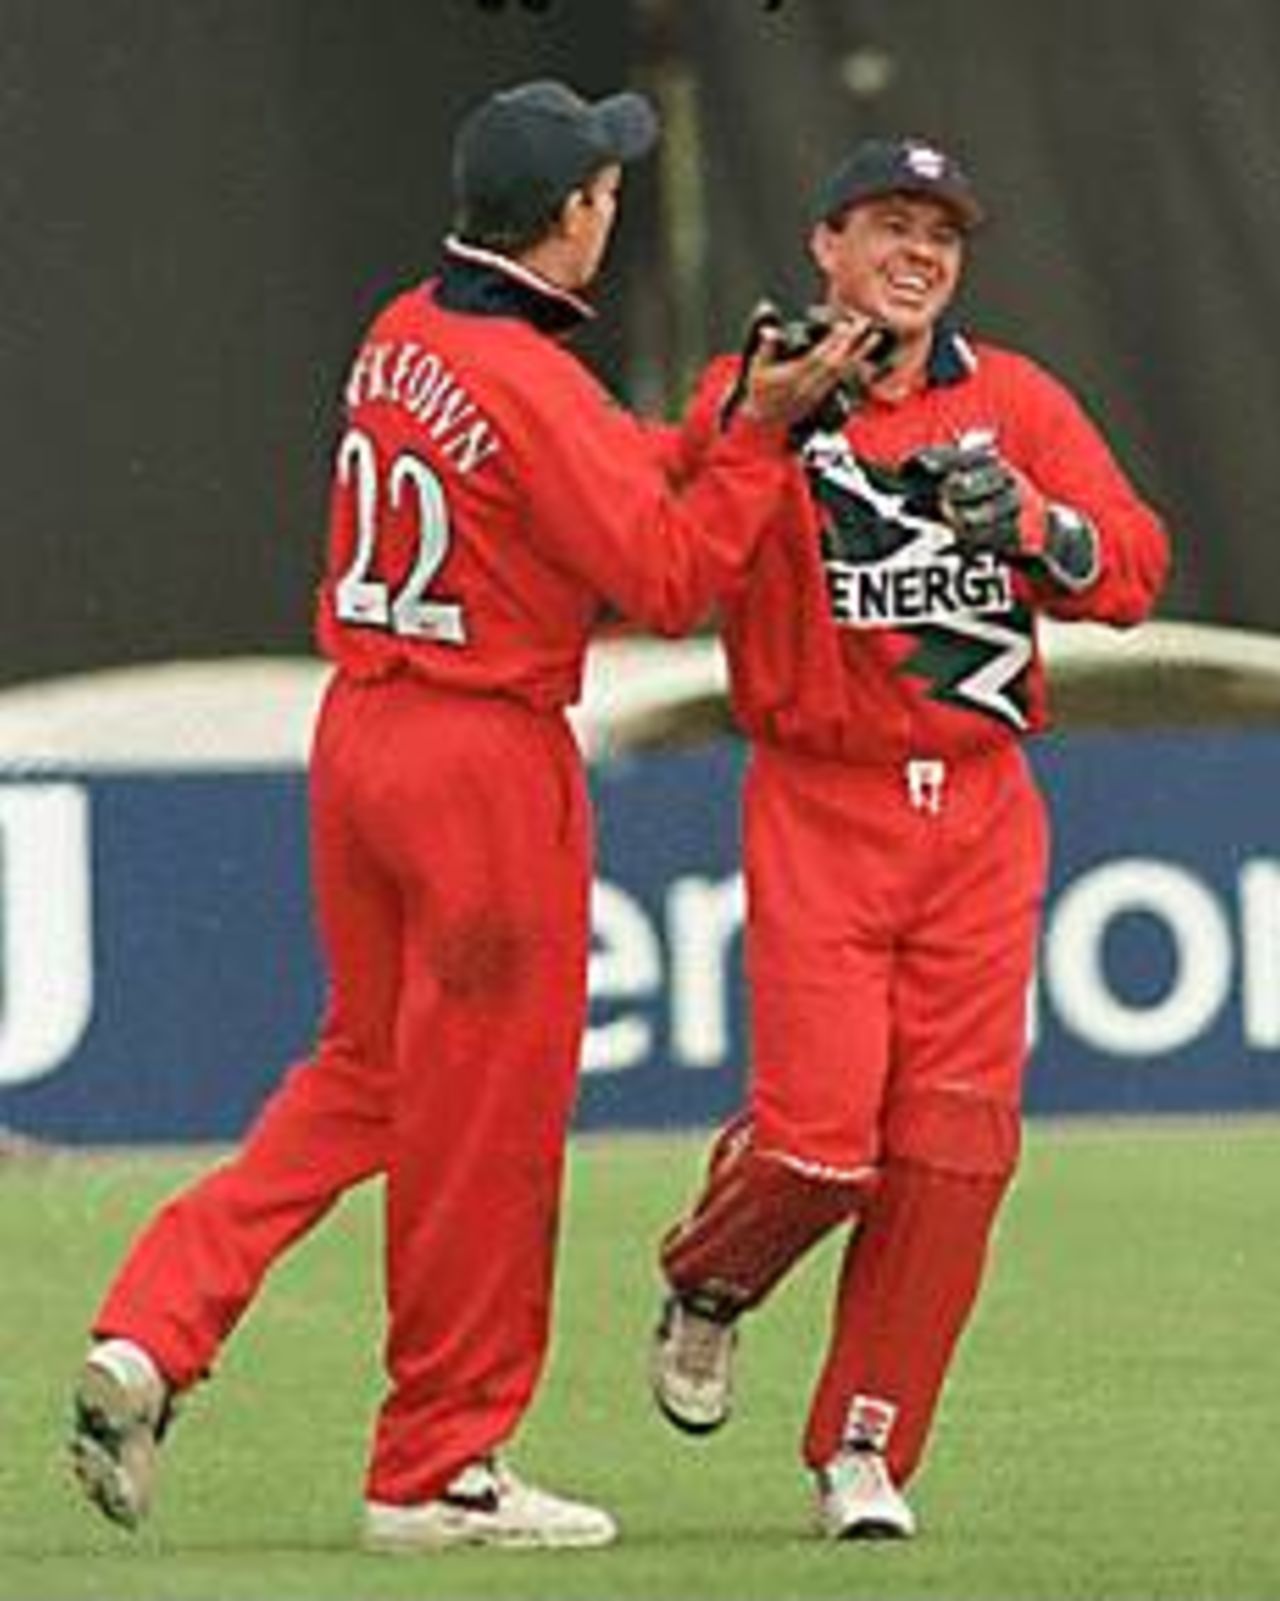 Warren Hegg and Patrick McKeown celebrating, Gloucestershire v Lancashire, National League 1st Division, 3 May 1999